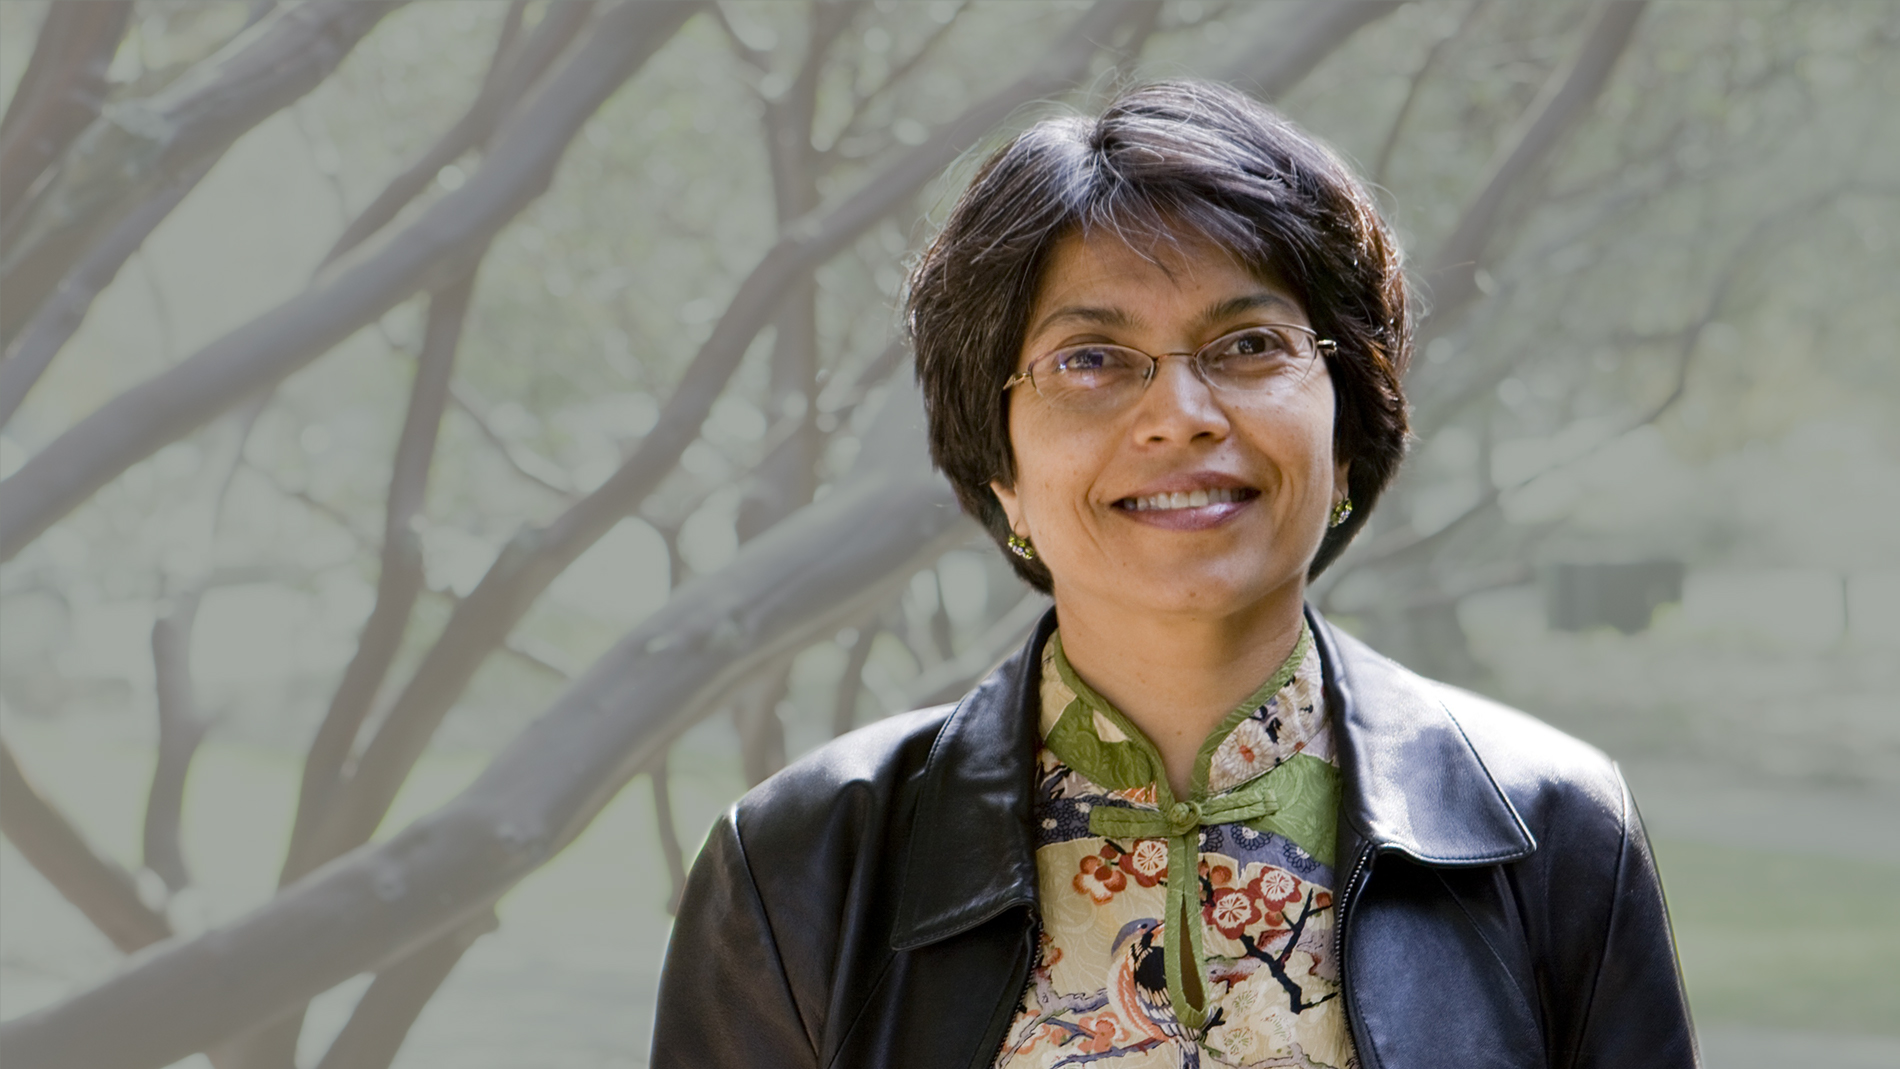 Image on Haas Institute mourns loss of Saba Mahmood, religious scholar and adored faculty member